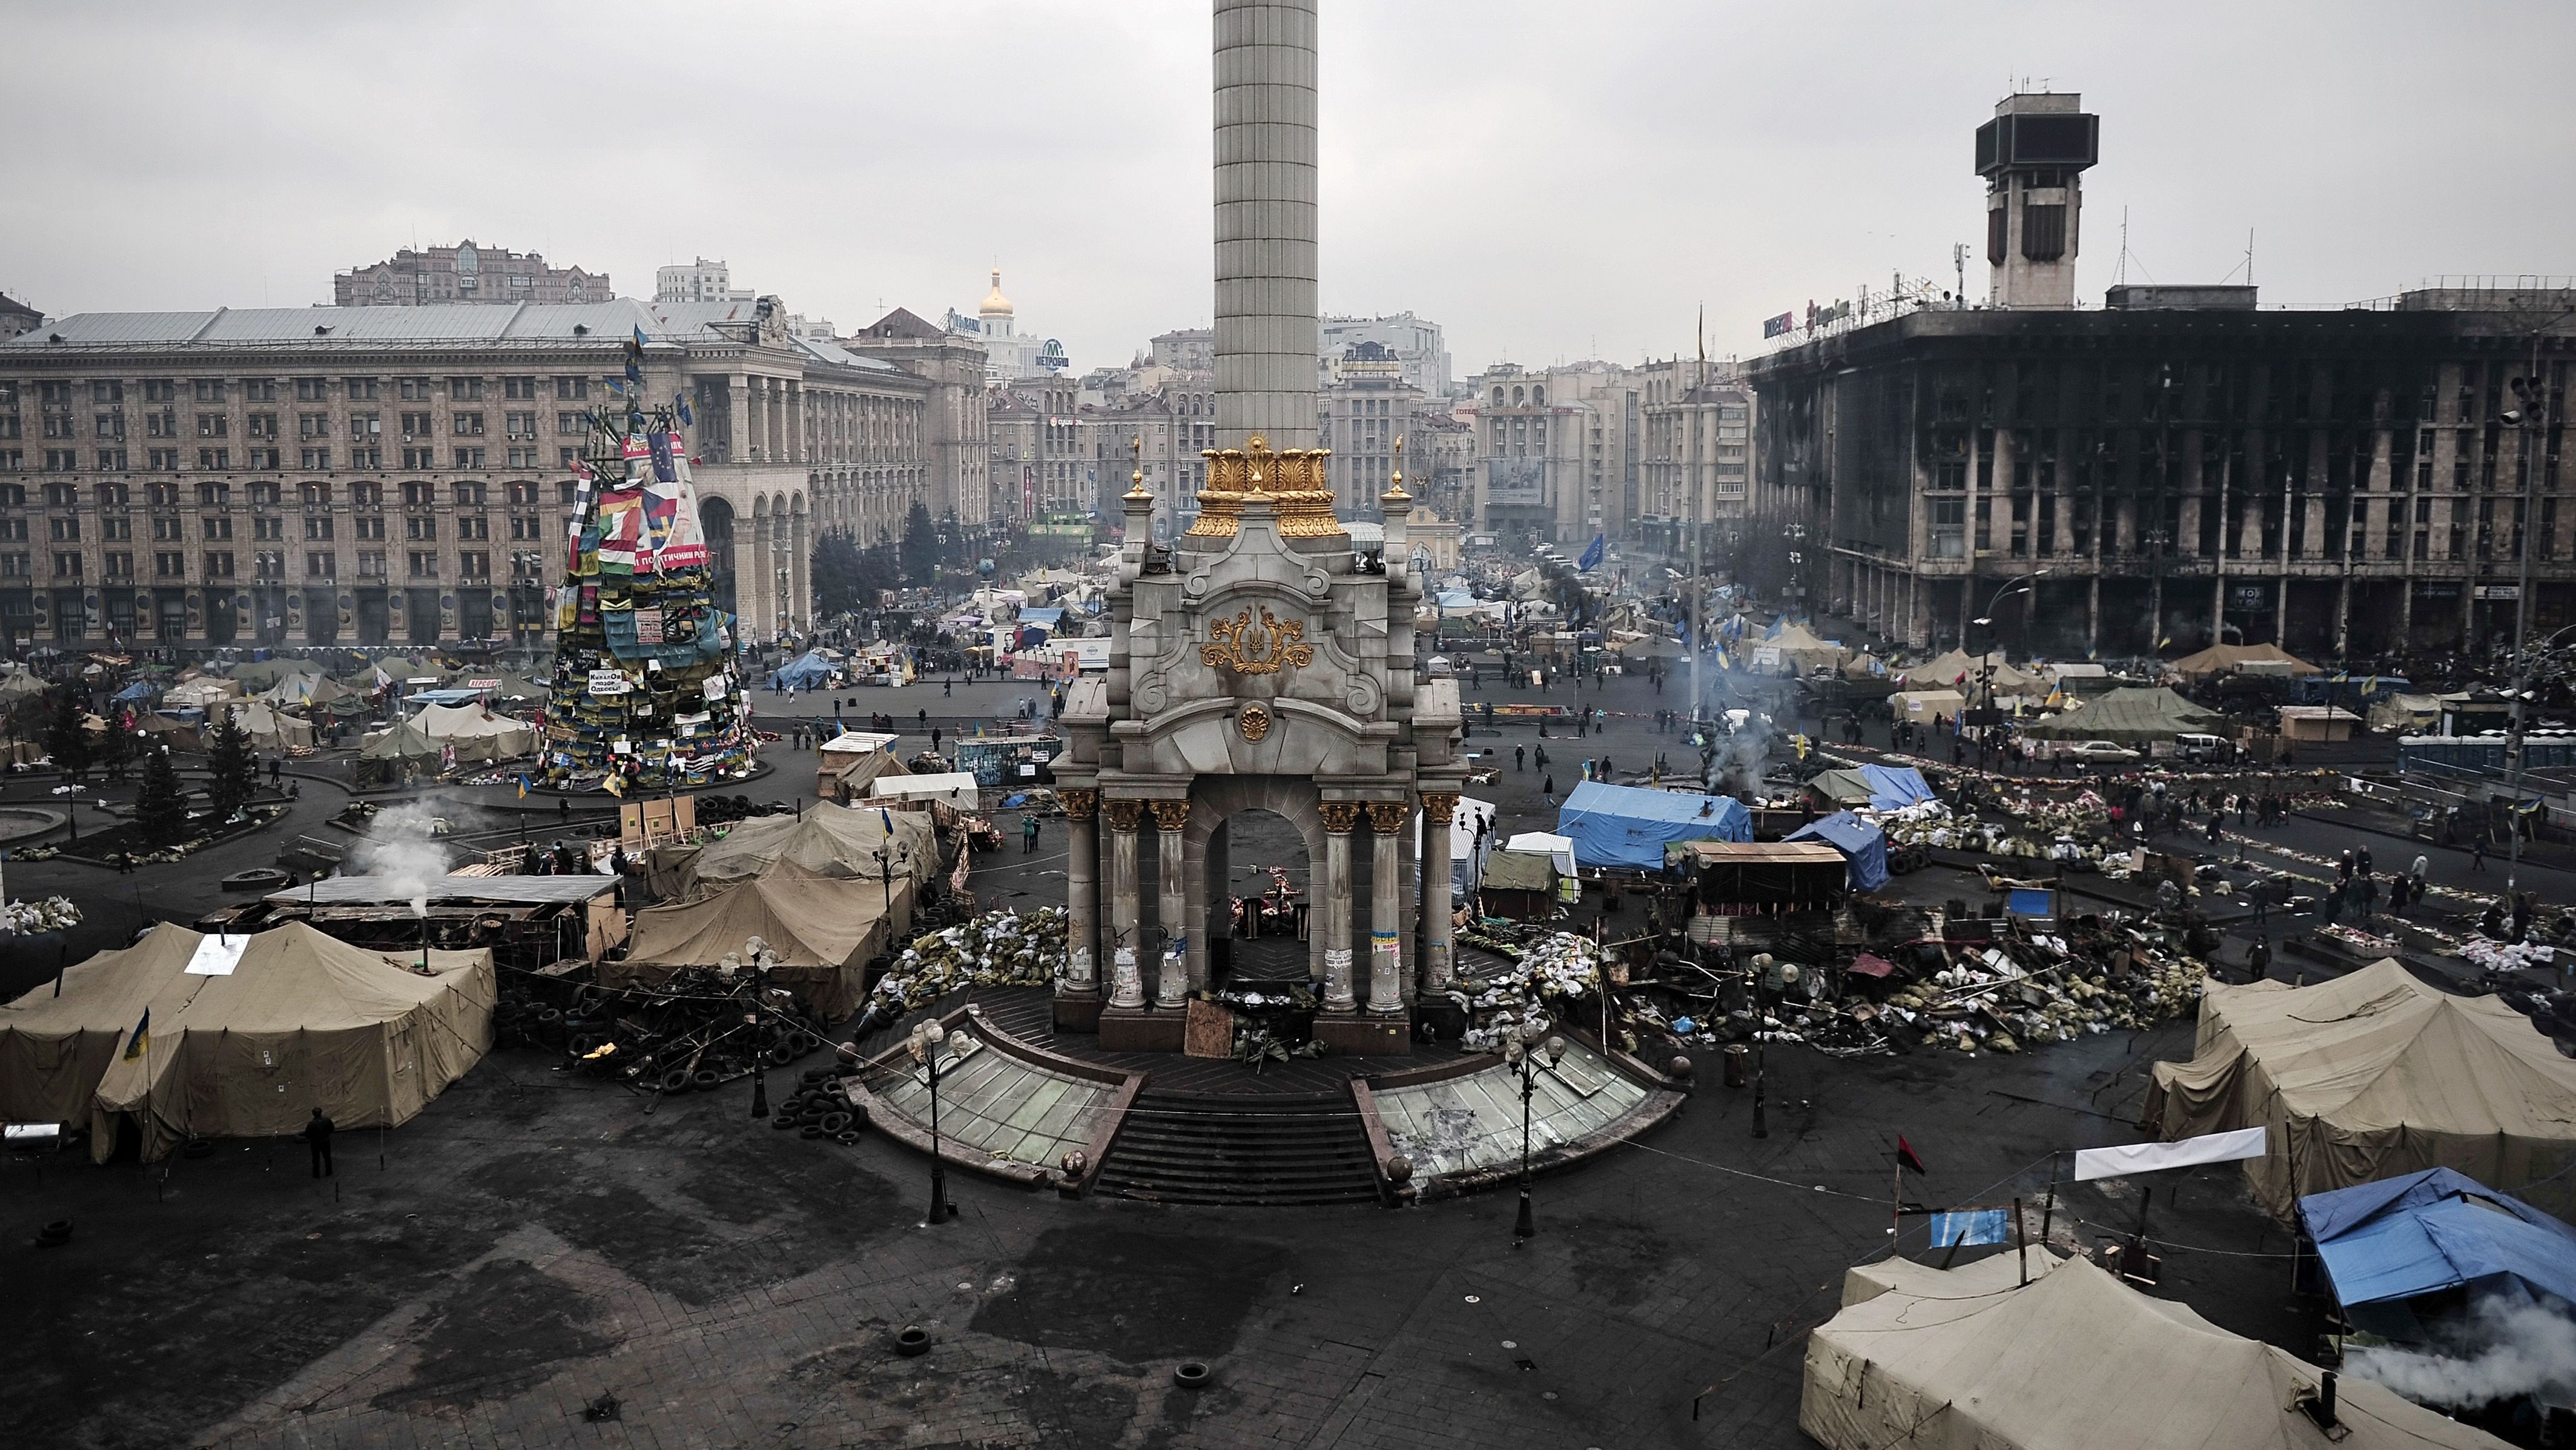 A view taken on February 28, 2014 shows a protesters' camp at the Independence square in central Kiev.